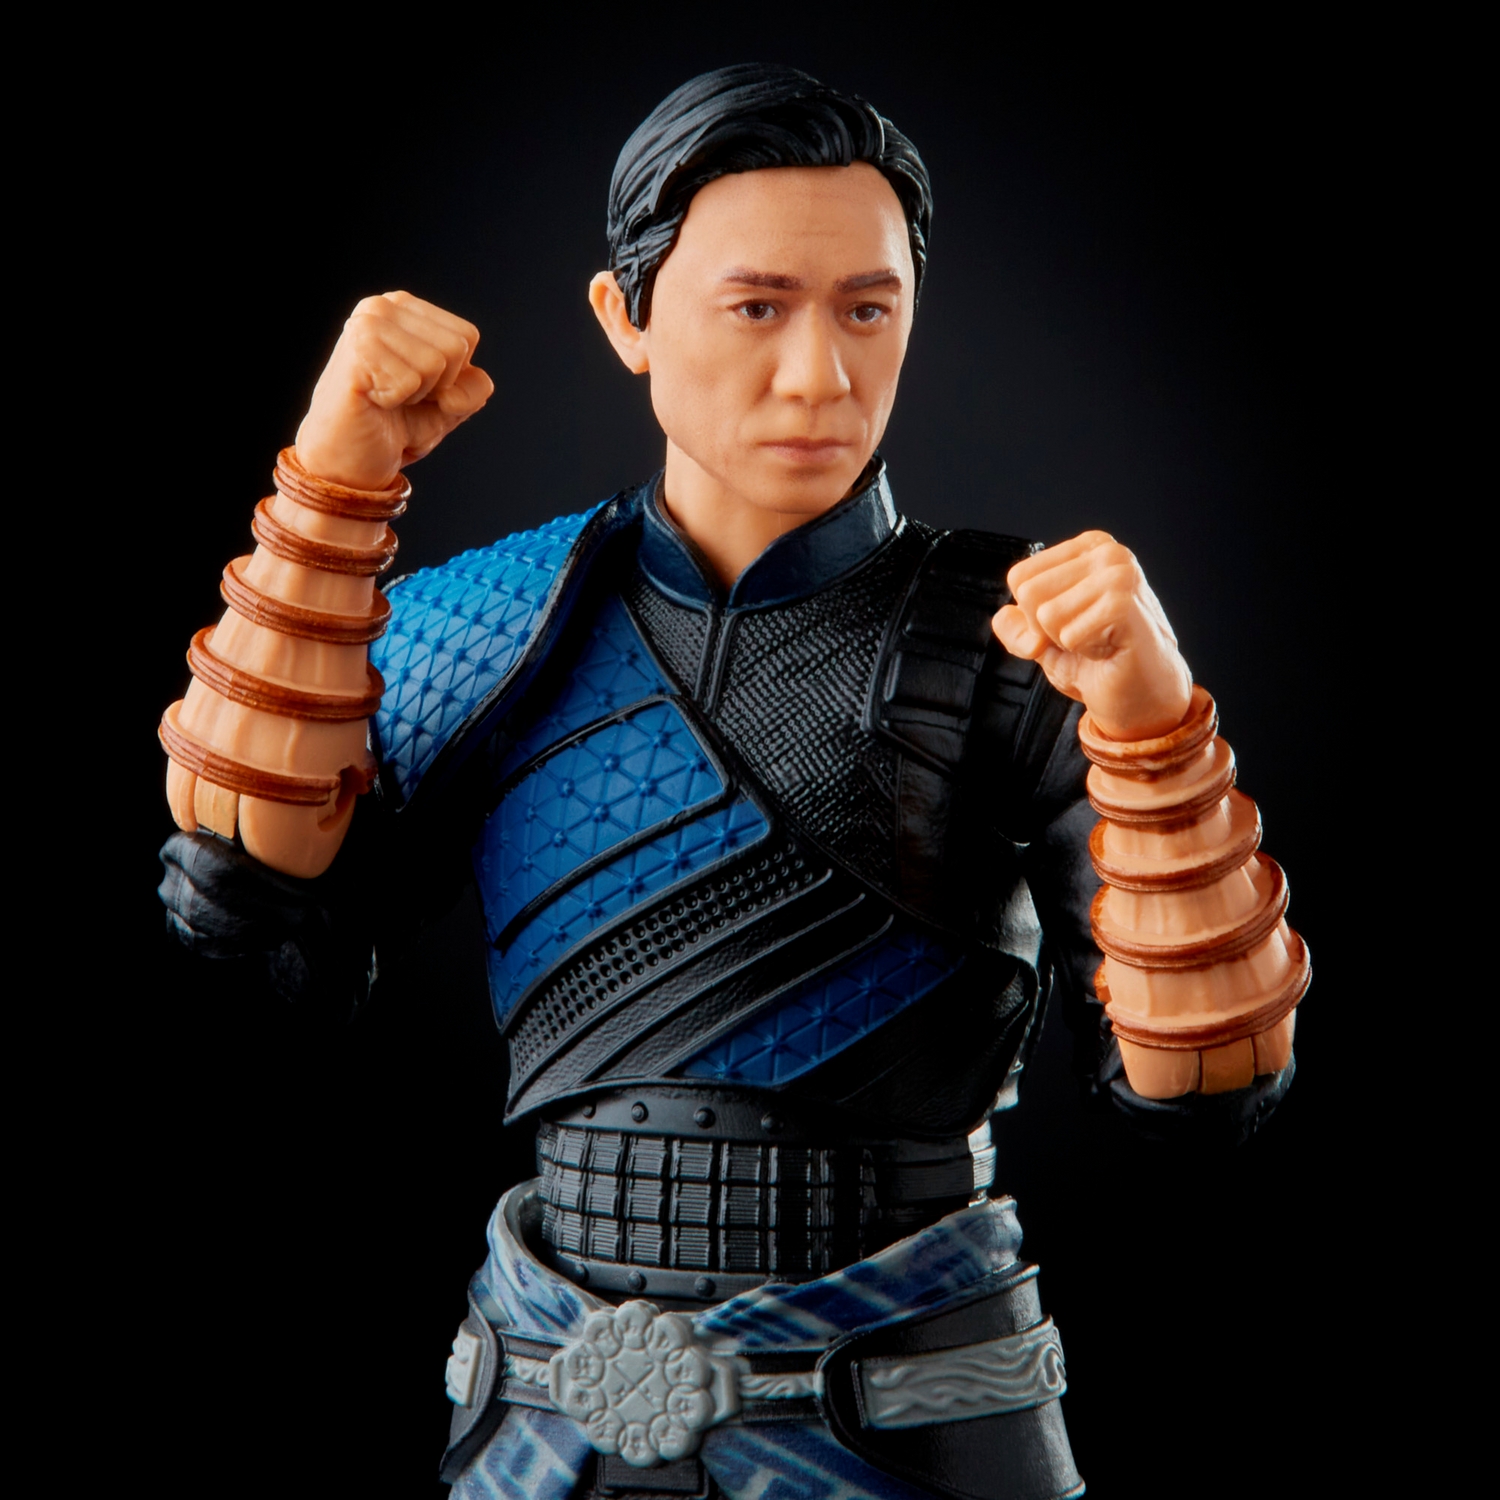 MARVEL LEGENDS SERIES 6-INCH SHANG-CHI AND THE LEGEND OF THE TEN RINGS - Wenwu oop3.jpg